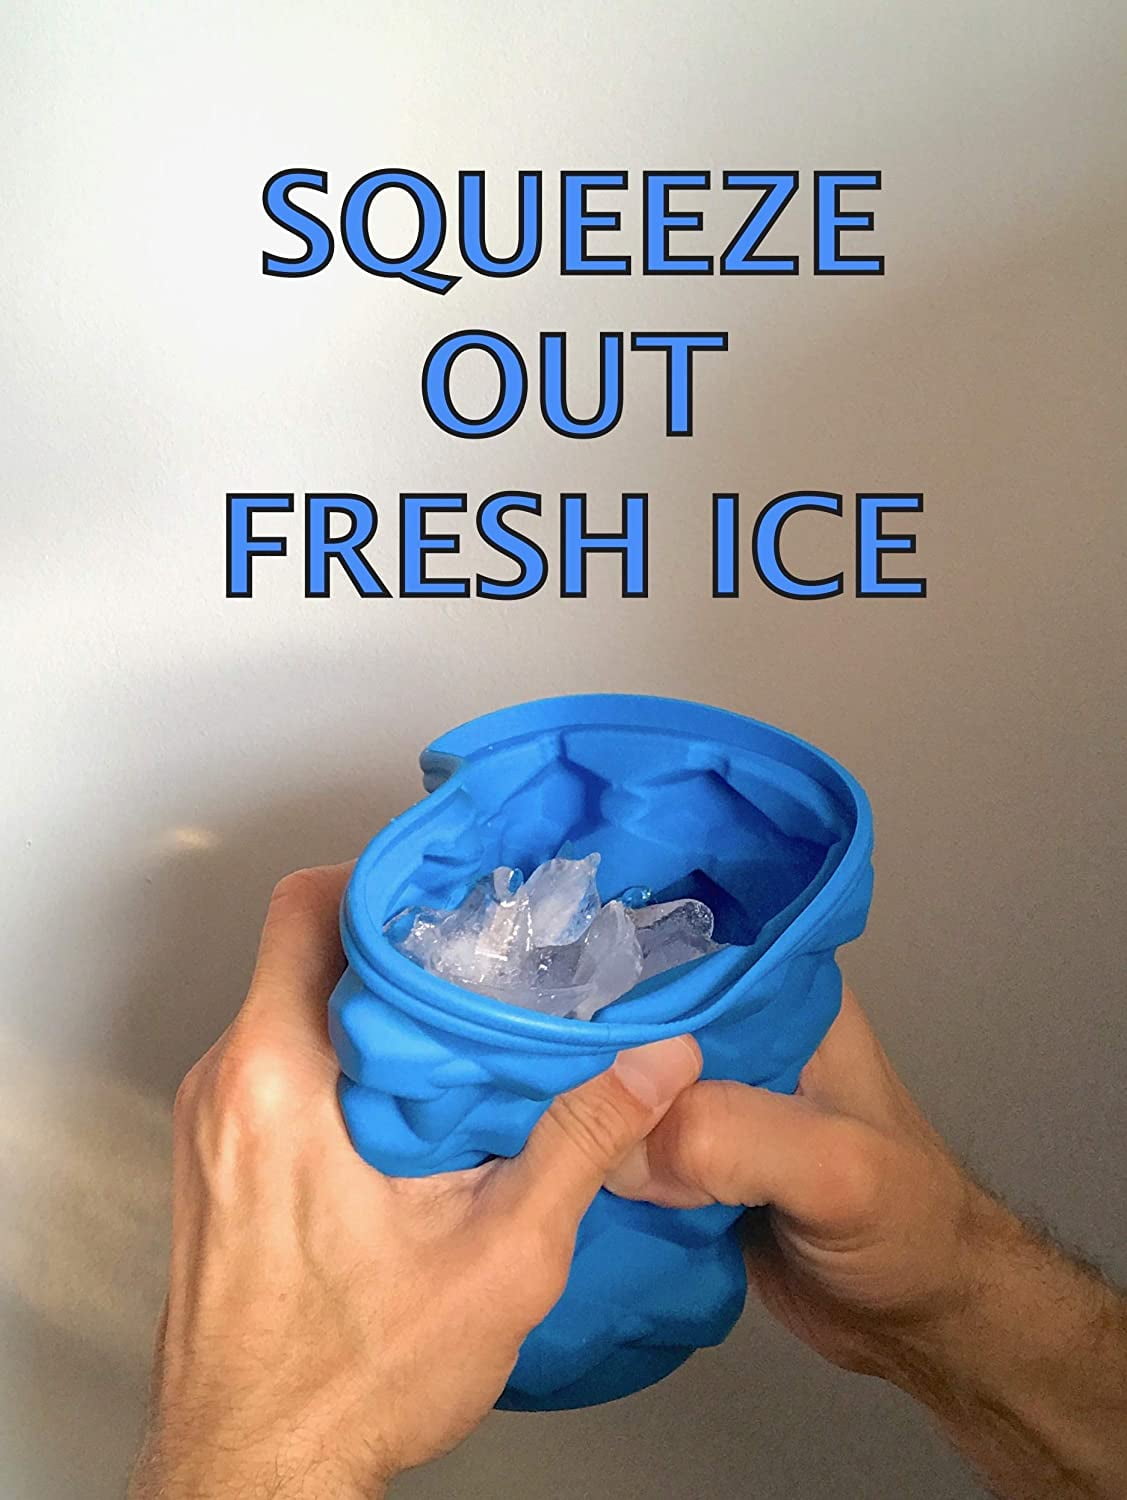 .com: New Ice Cube Maker Silicone Bucket Mold Cooler With Lid  Indoors/Outdoors Use Makes Small Nugget Ice Chips for Soft Drinks Beverage  Wine Beer Whiskey Cocktail Safe Healthy BPA Free Ice Tray